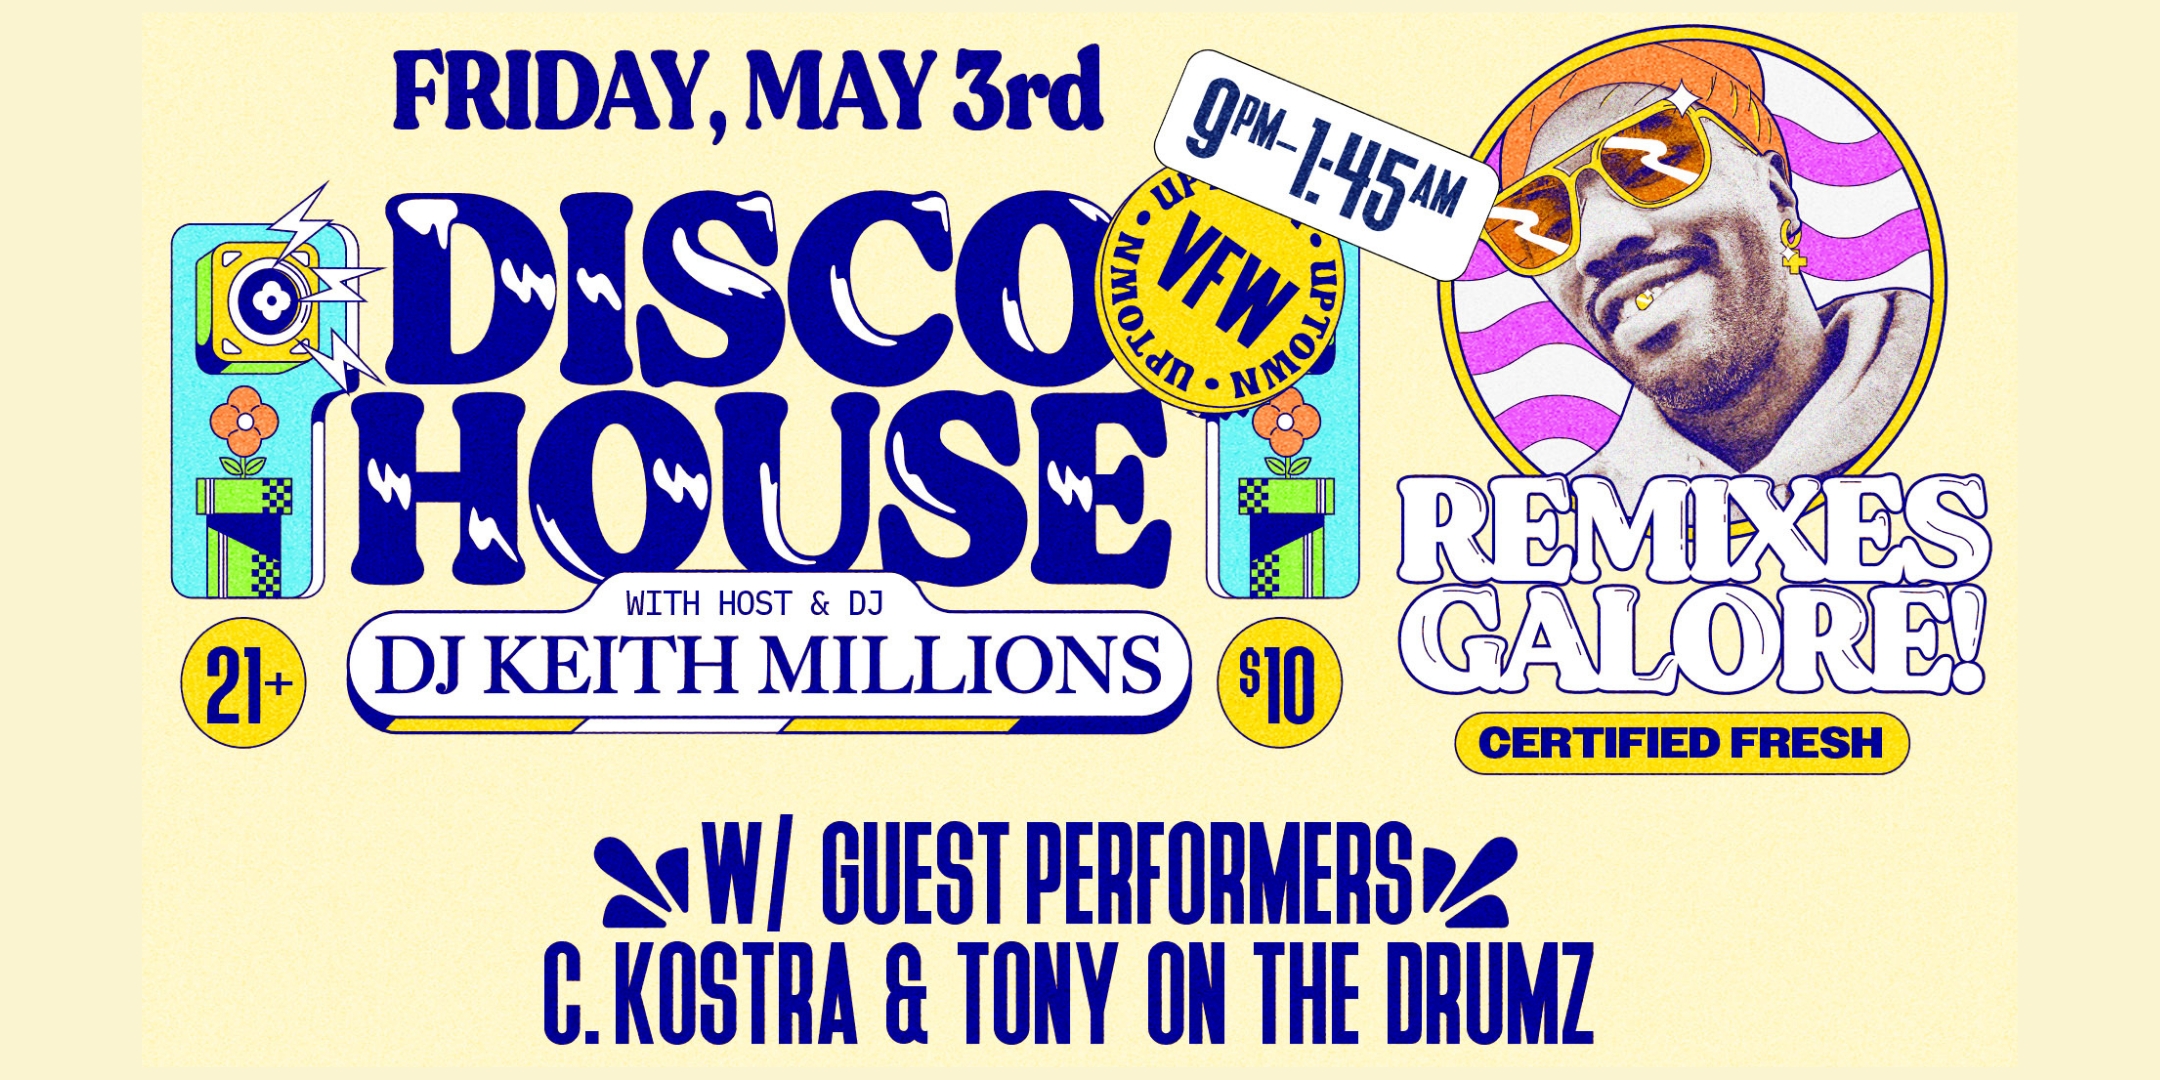 Nightchurch Presents: DISCO HOUSE with Host & DJ: DJ Keith Millions w/ Guest Performers: C. Kostra & Tony on the Drums Disco Gems / House Heat / Remixes Galore / Certified Fresh Friday May 3 James Ballentine "Uptown" VFW Post 246 2916 Lyndale Ave S Mpls Doors 9pm :: Music 9pm :: 21+ GA: $5 ADV / $10 DOS